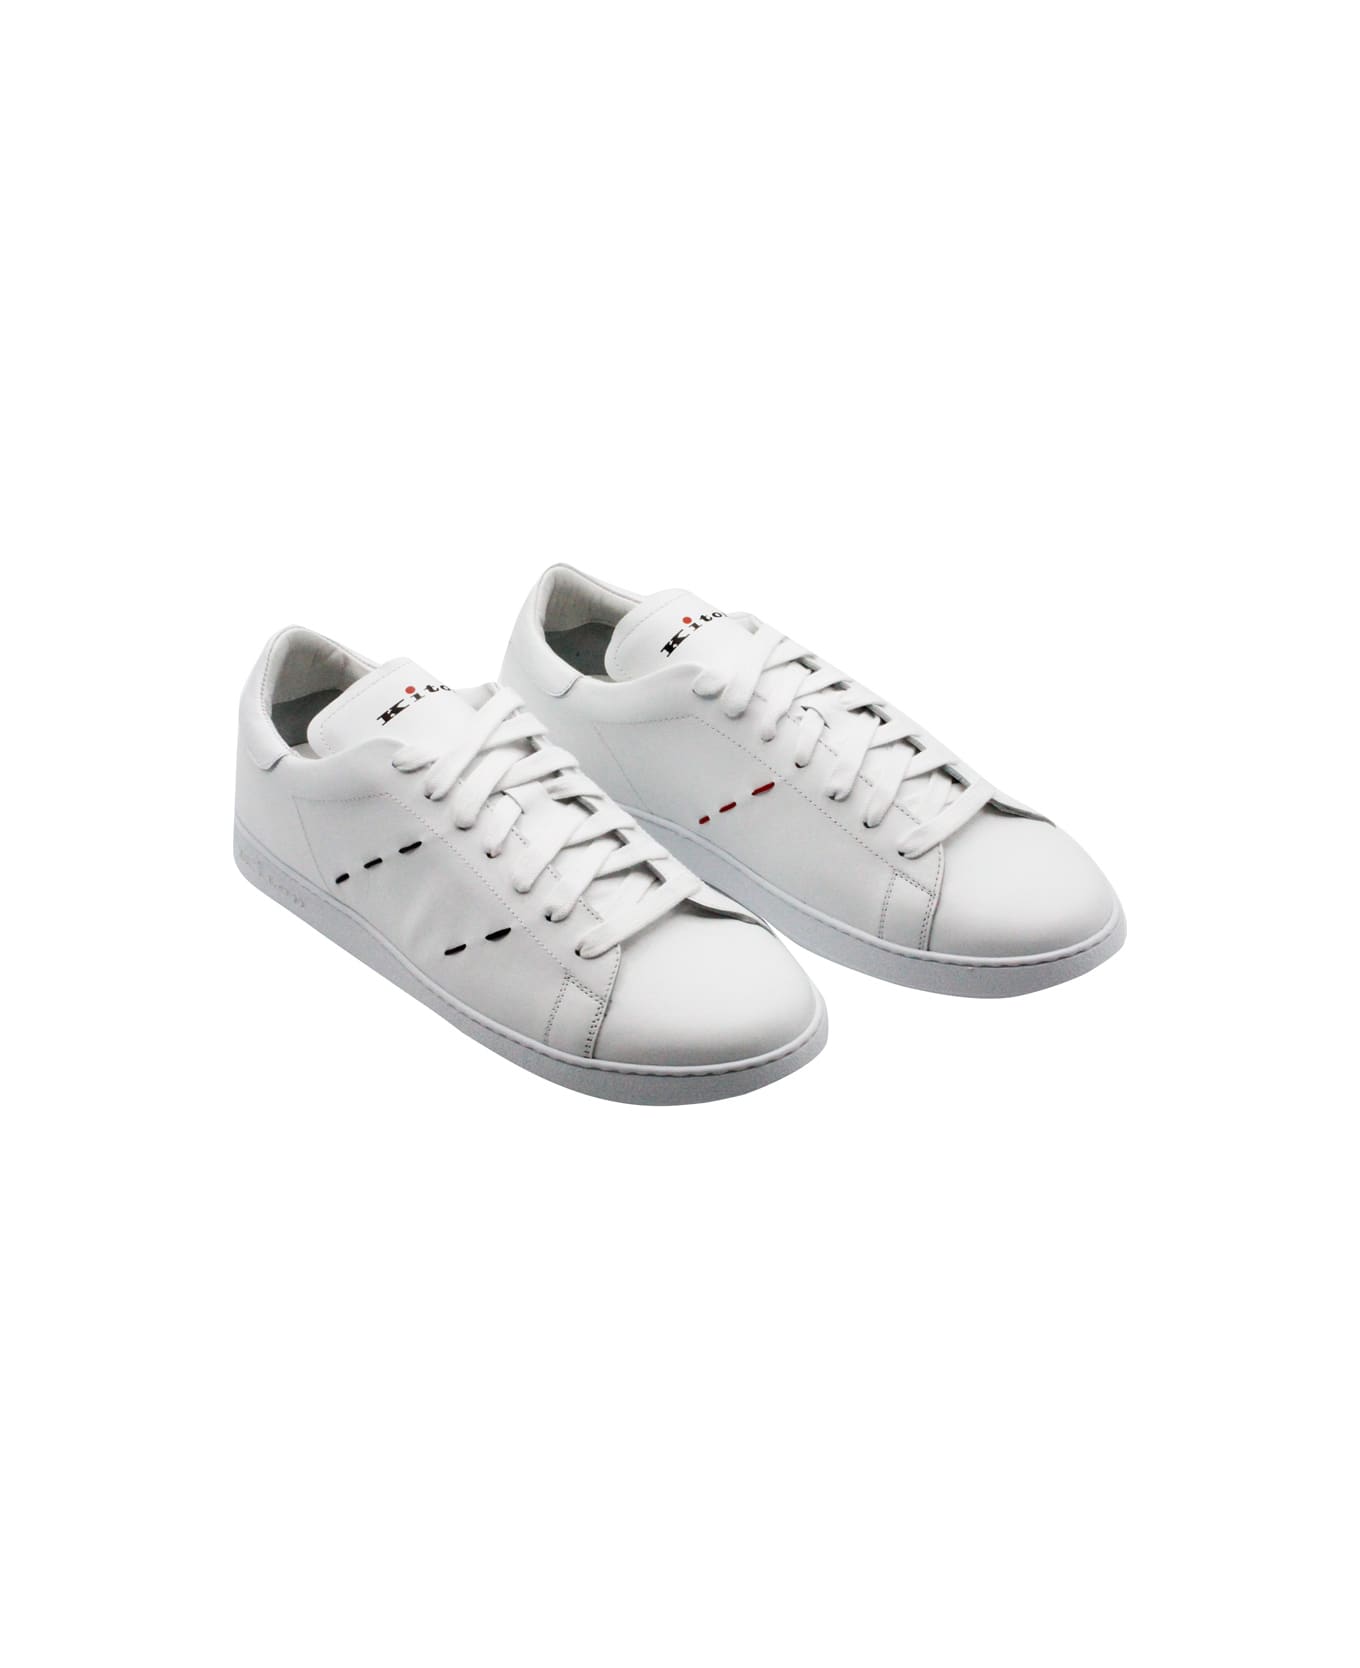 Kiton Lightweight Sneaker Shoe In Soft Leather With Contrasting Color Finishes And Stitching. Tongue With Logo Print And Lace Closure. - White